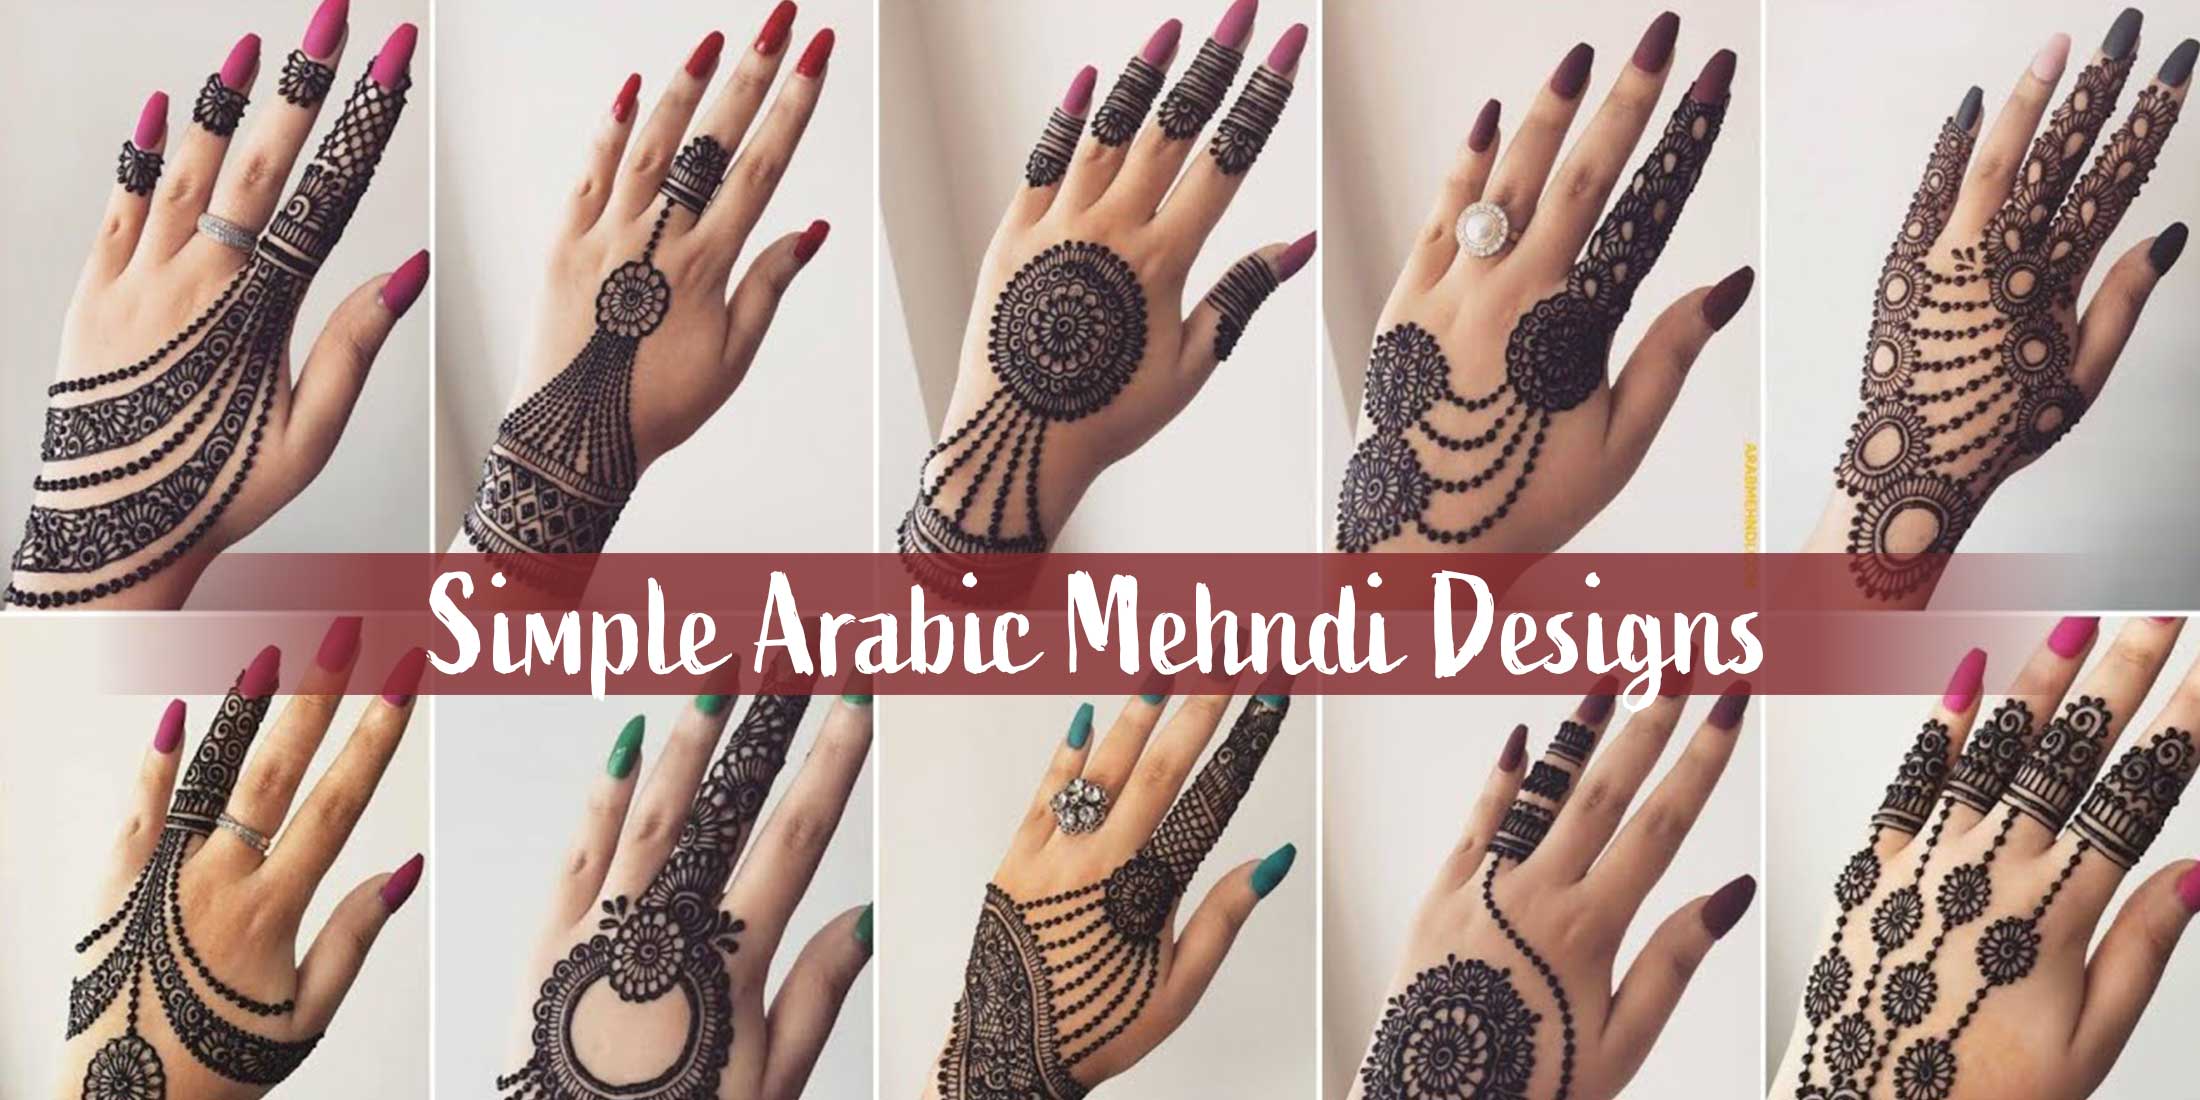 New Easy Stylish Simple Mehndi Design For Back Hands | Easy Mehandi Design  | Mehandi ka Design | Note: If you wish to share this video, please make  sure you embed the